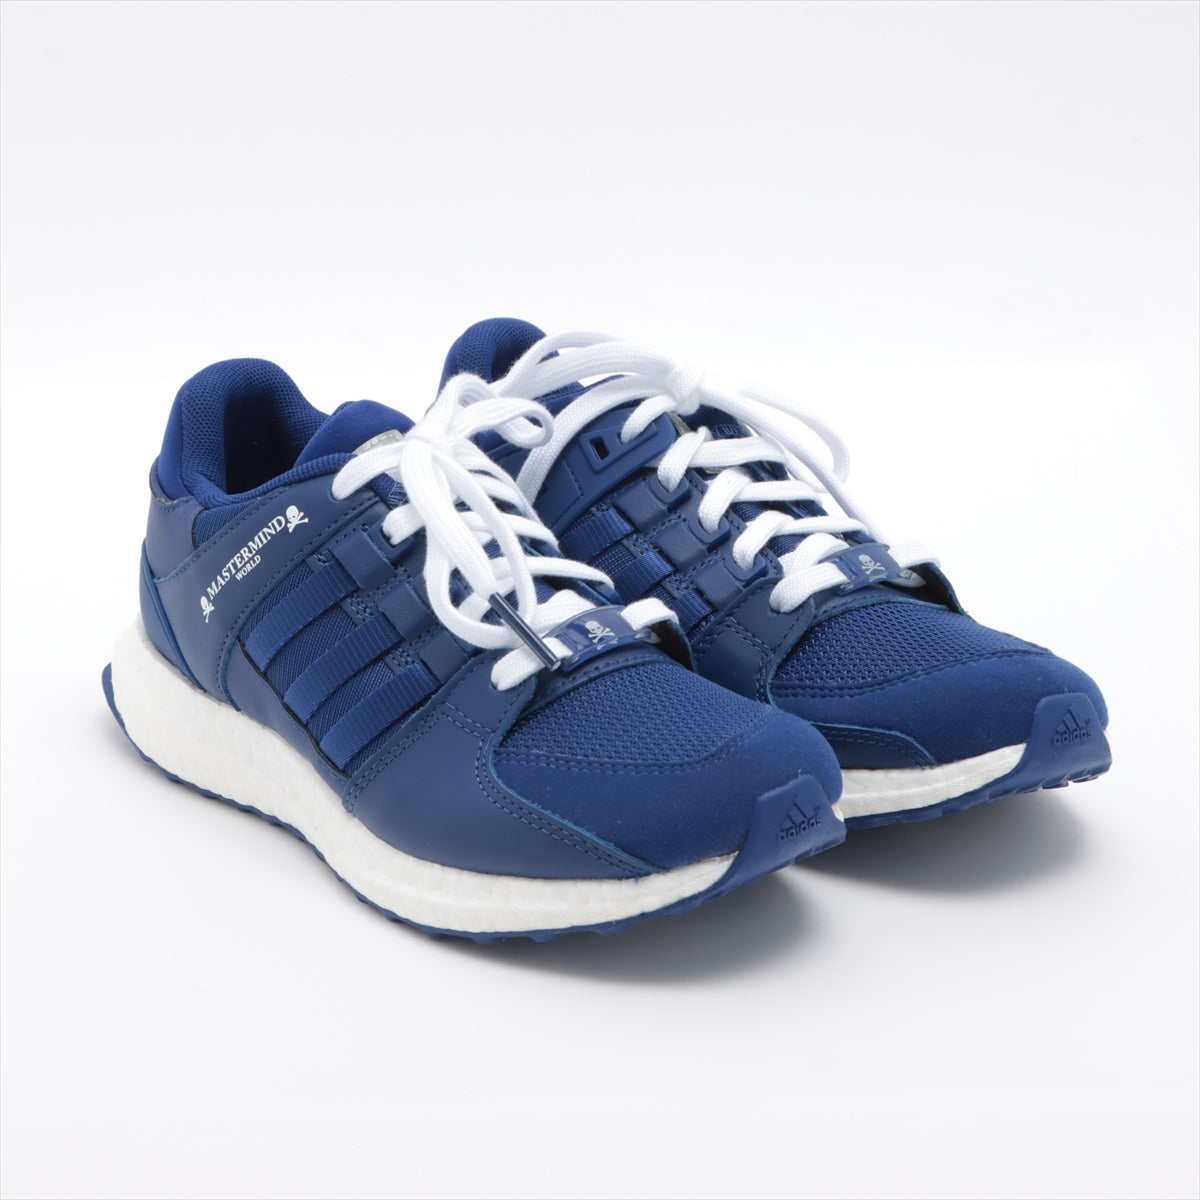 Adidas × Mastermind 2017 Leather ×Fabric Sneaker 23㎝ Ladies Blue EQT SUPPORT ULTRA MMW CQ1827